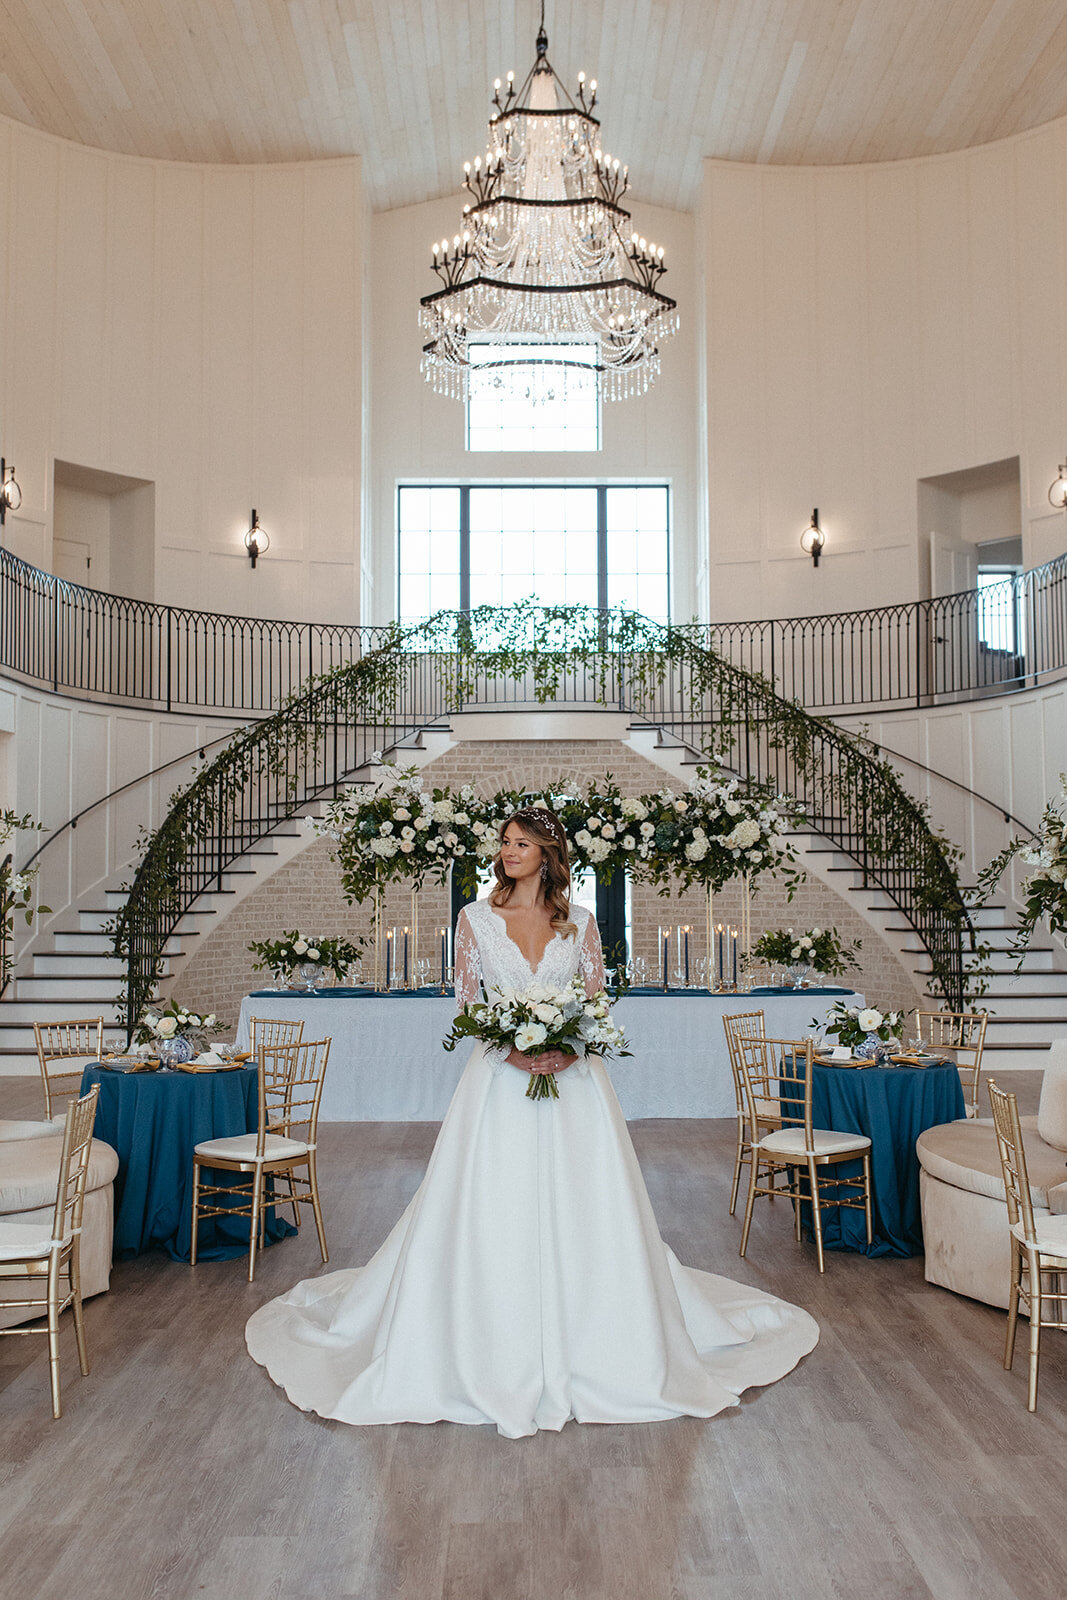 A bride in a white wedding gown holds a bouquet below chandelier in front of a two-sided staircase wrapped in garland.